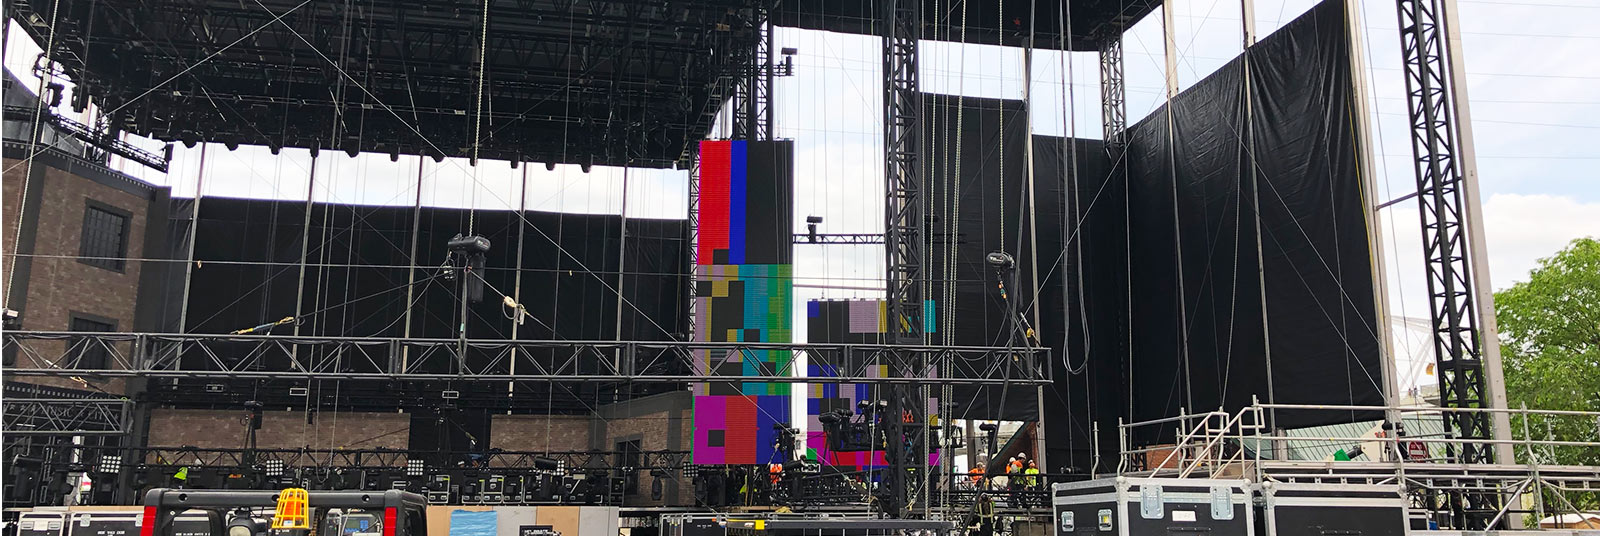 View of the temporary stage under production at the 2019 NFL Draft in Nashville, Tennessee.